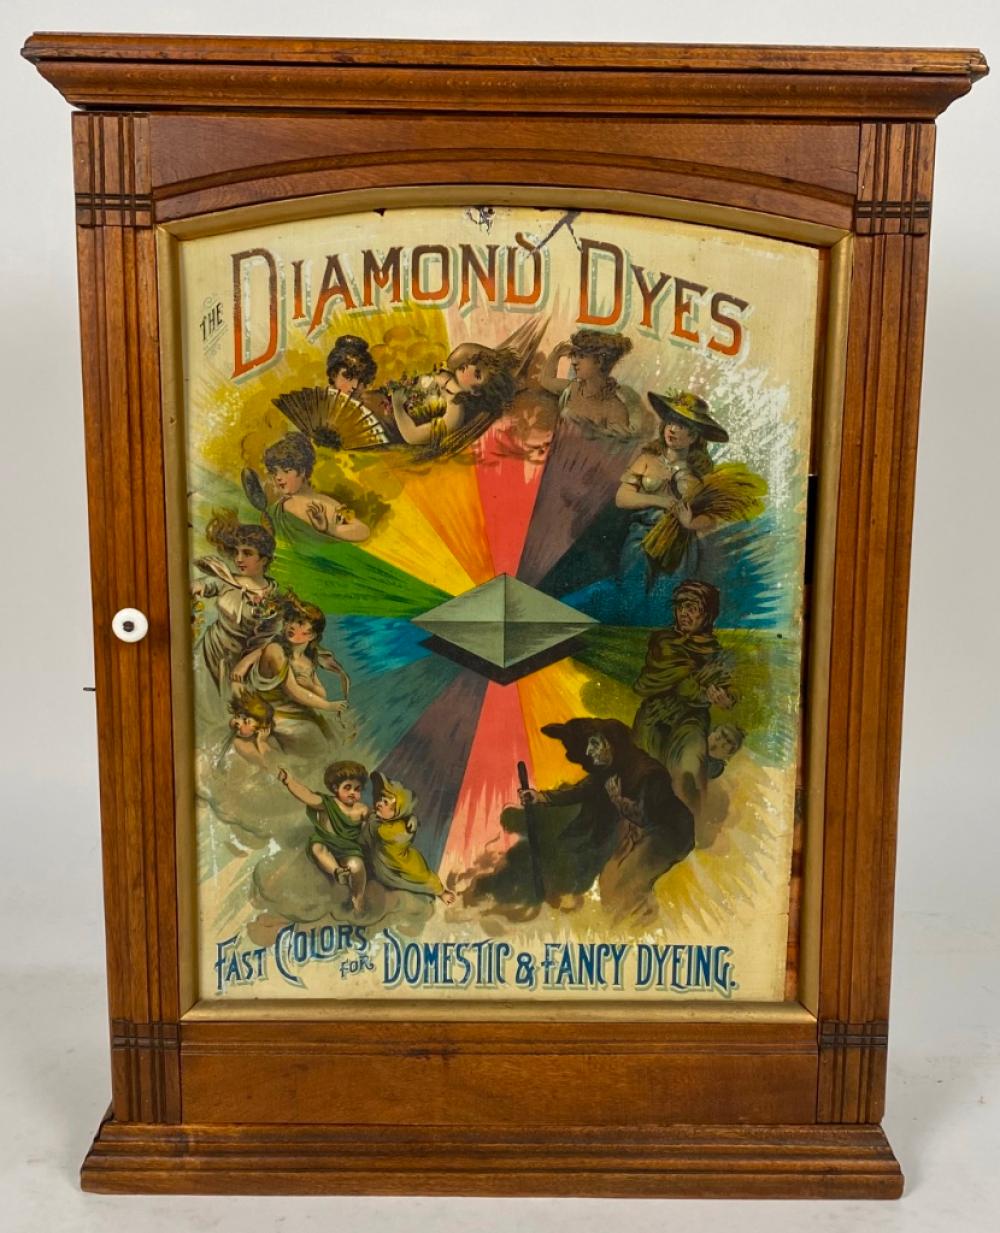 DIAMOND DYES COMPANY GENERAL STORE 2f2207